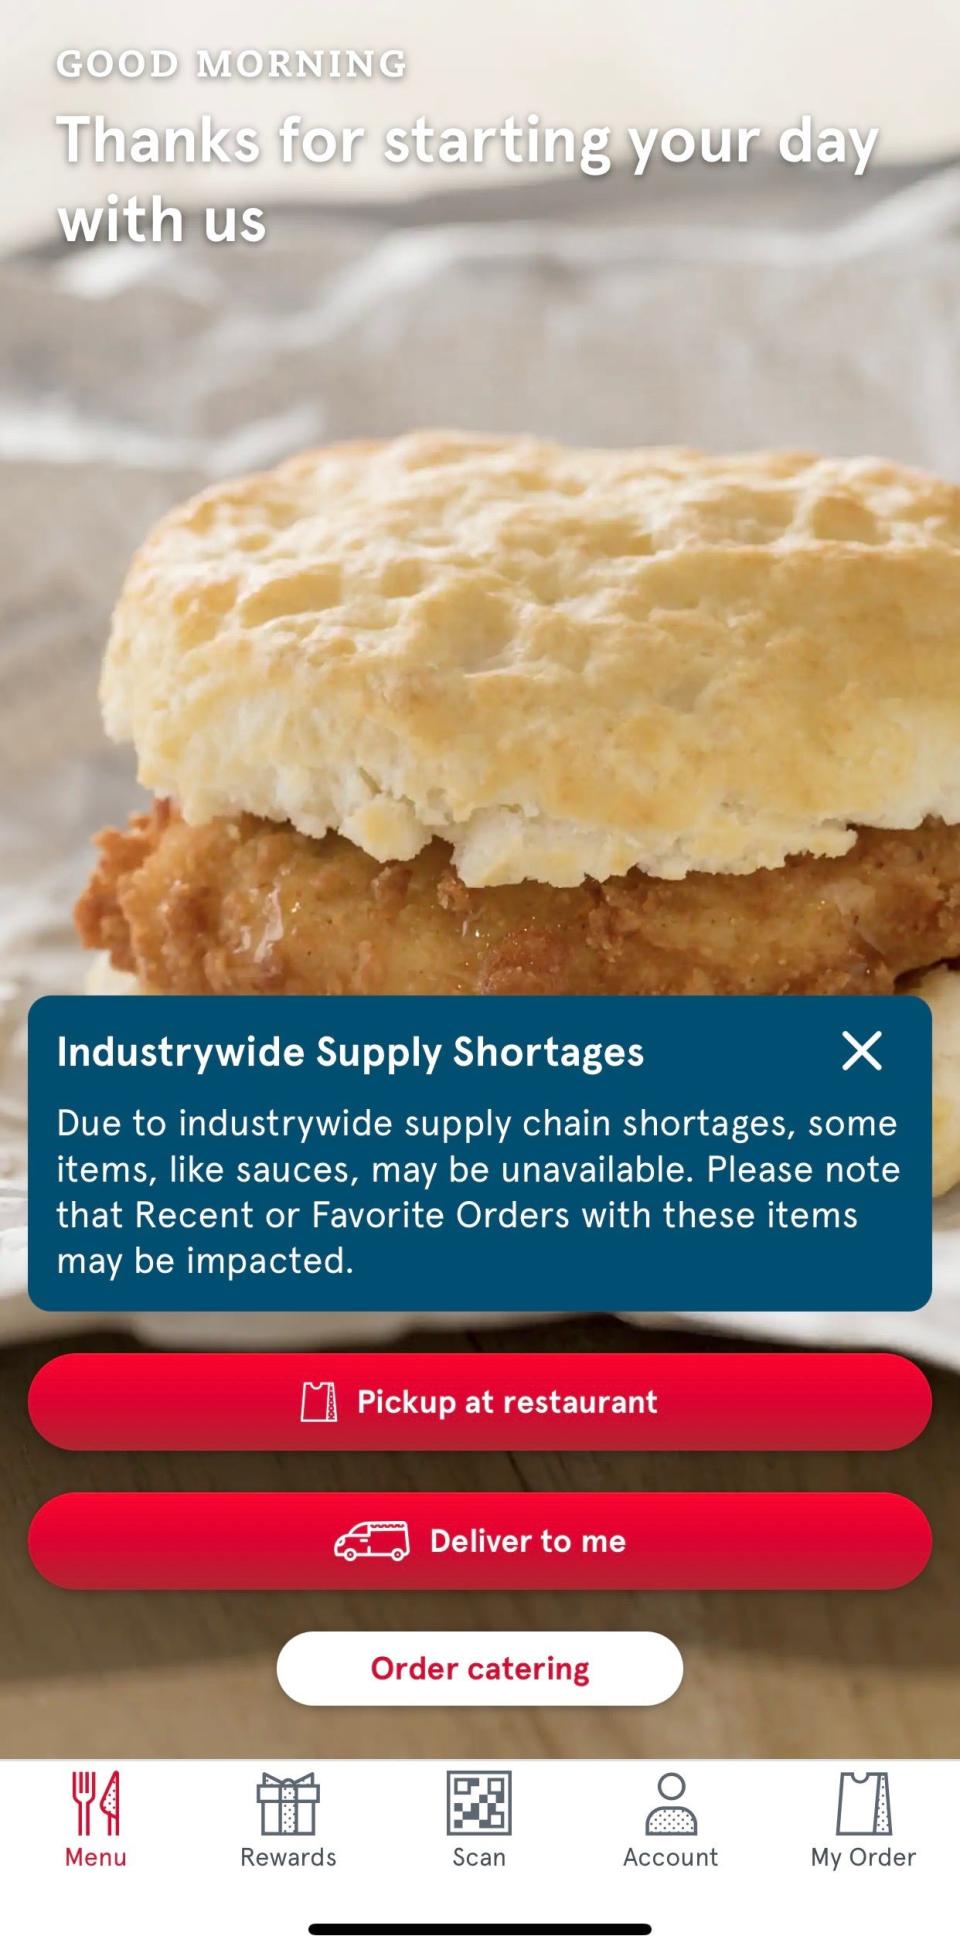 On the Chick-Fil-A app, the home screen has a notice that says there is an industrywide shortage of sauce.